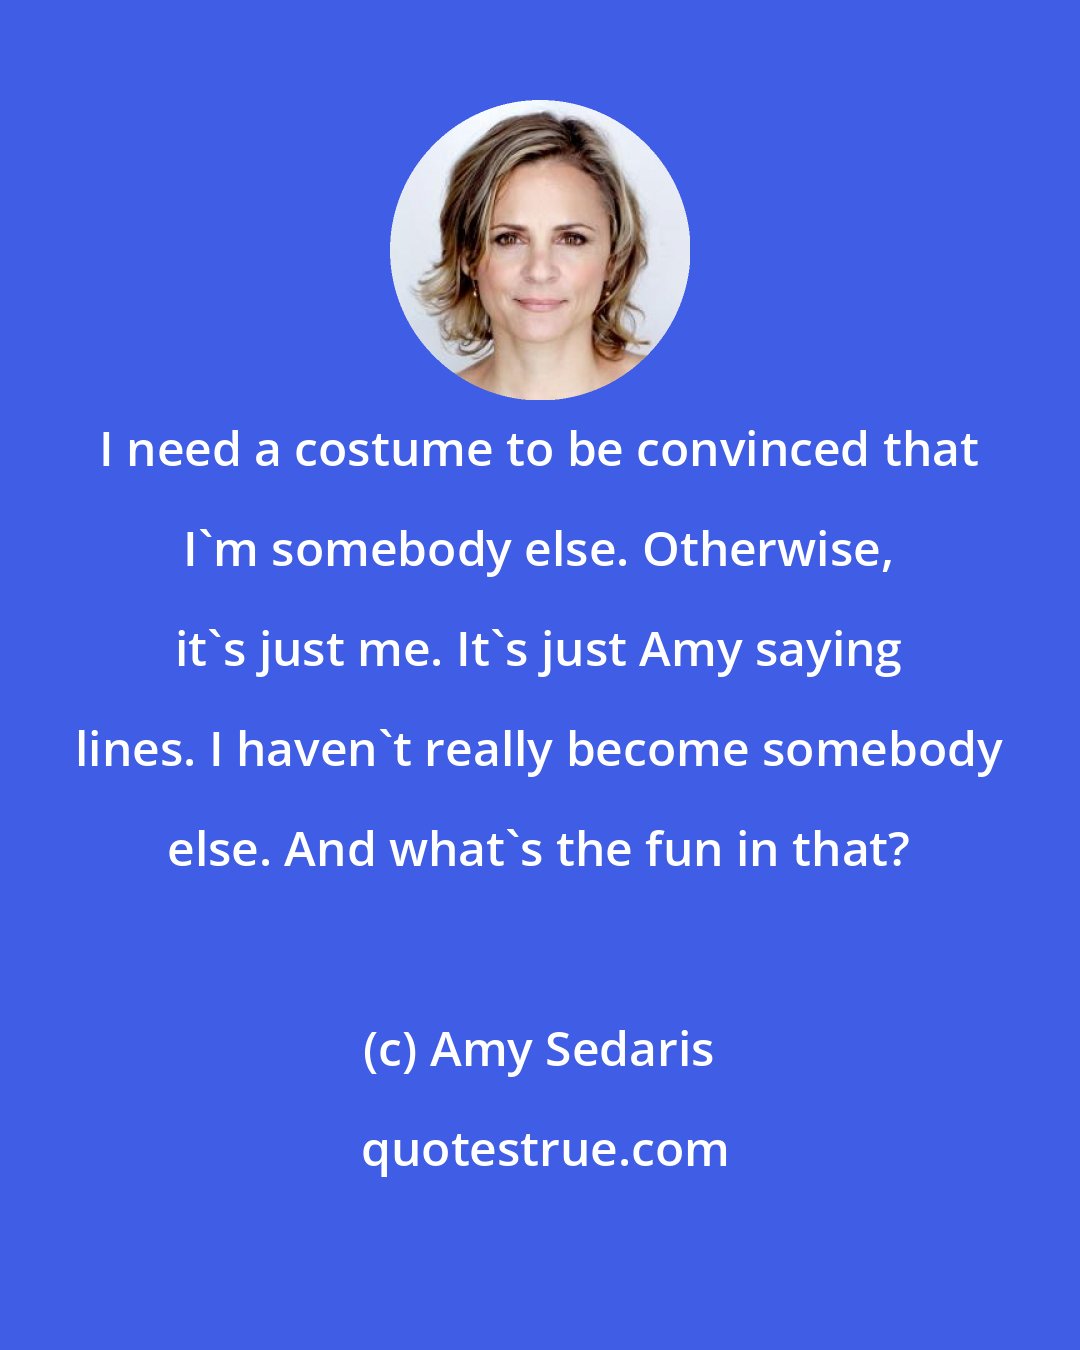 Amy Sedaris: I need a costume to be convinced that I'm somebody else. Otherwise, it's just me. It's just Amy saying lines. I haven't really become somebody else. And what's the fun in that?